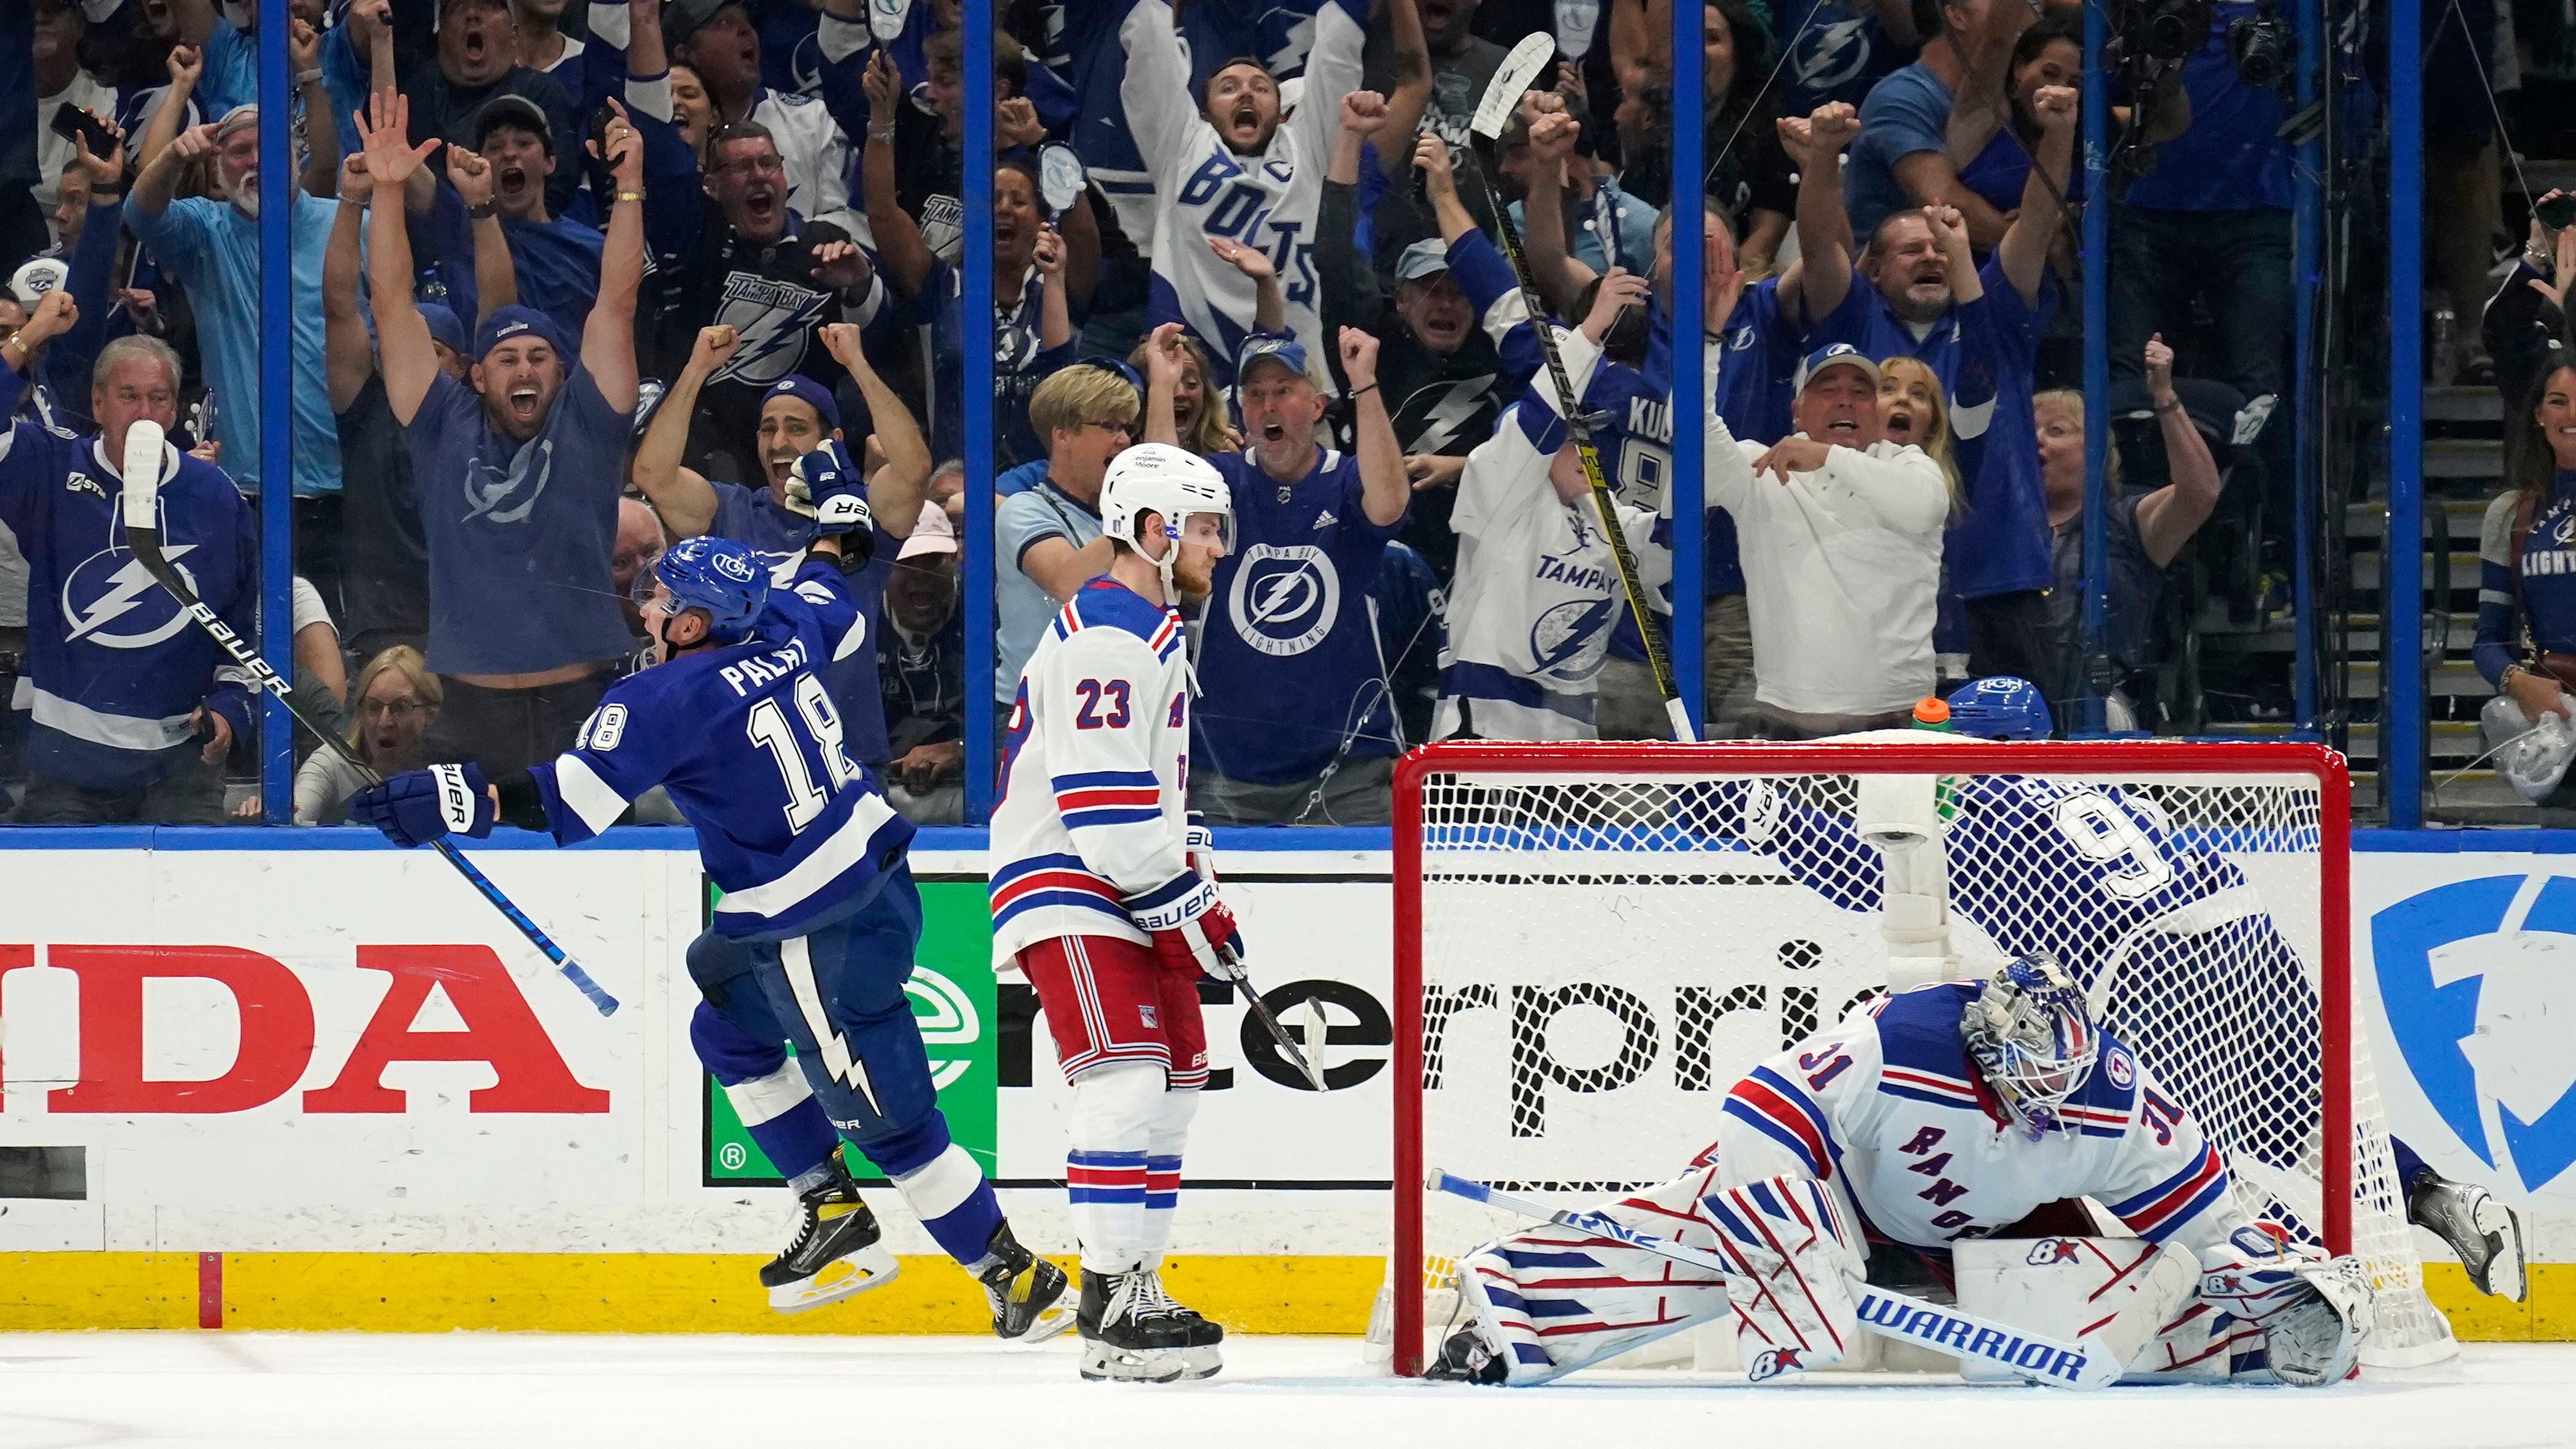 Palat scores late, Lightning beat Rangers 3-1 in Game 5 – The